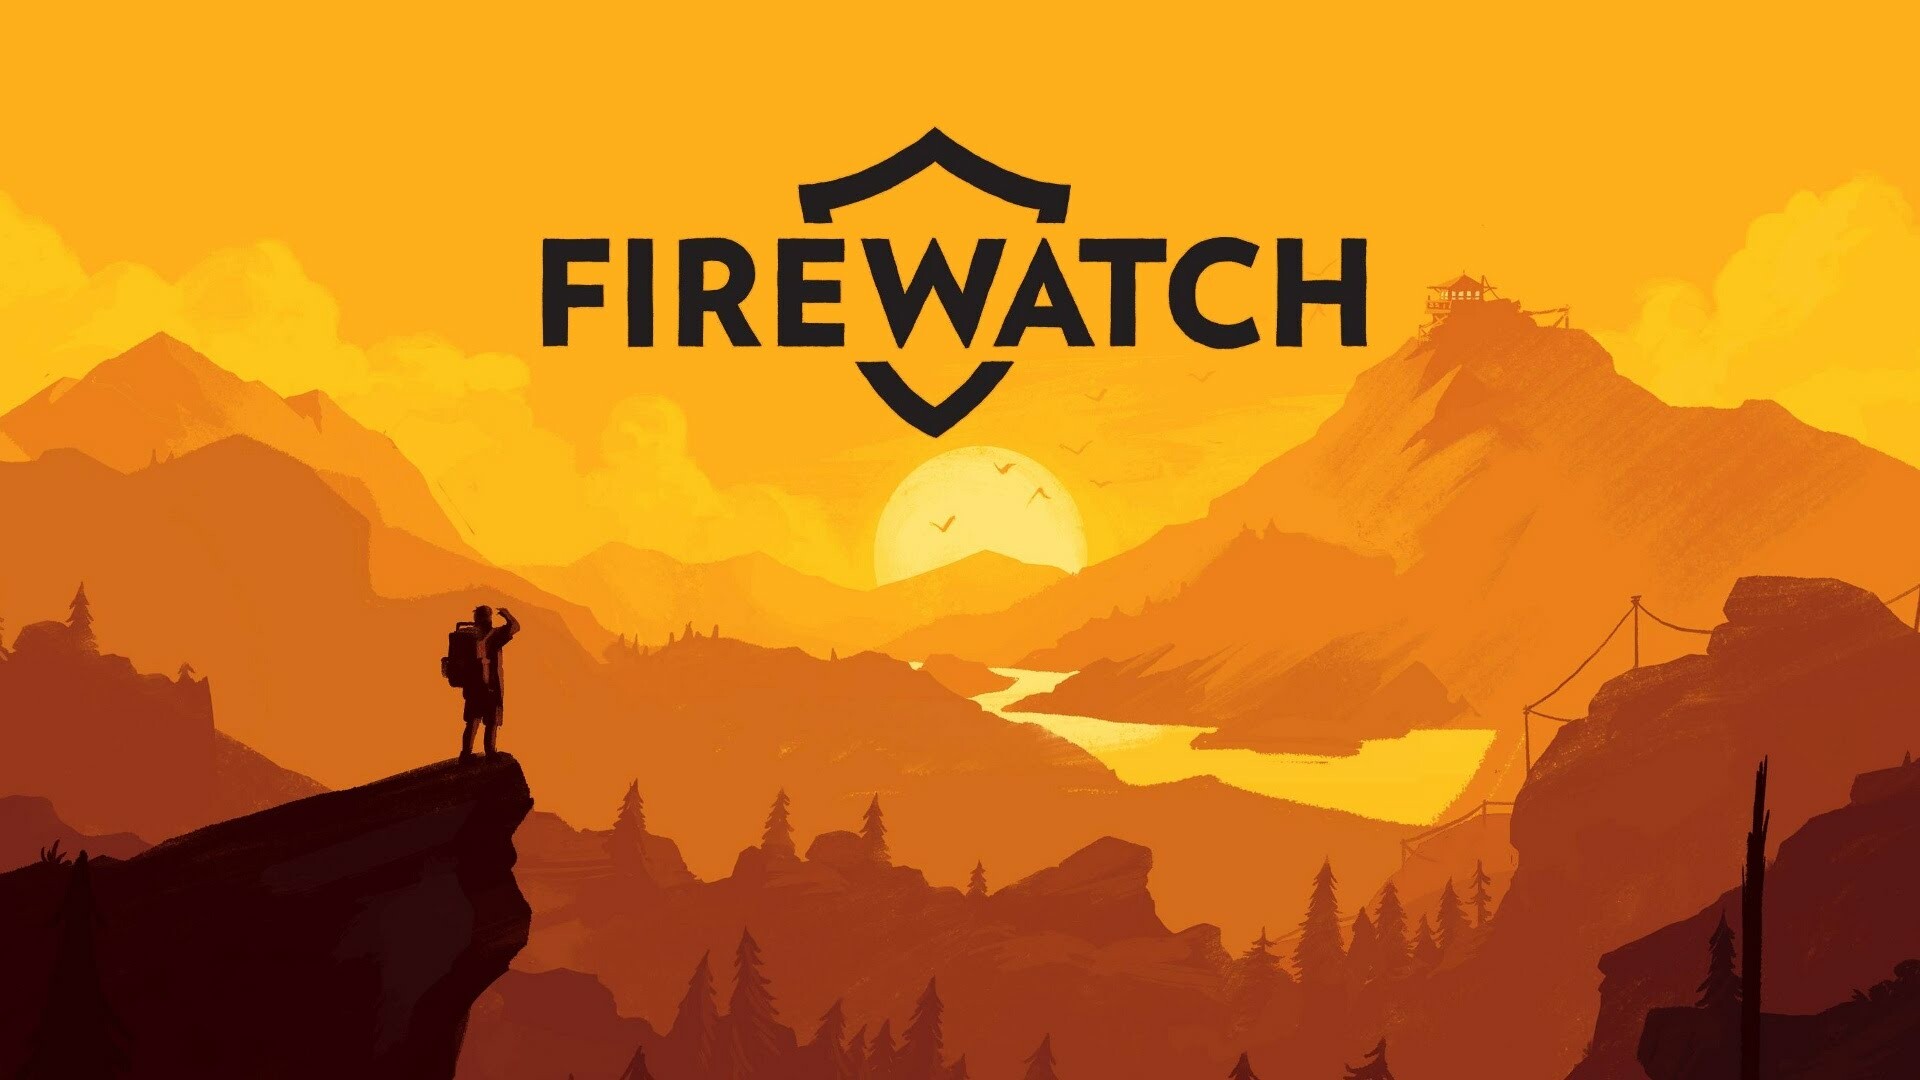 Firewatch: The game about solitude and space, A first-person journey through the massive wilderness of America’s Shoshone National Forest. 1920x1080 Full HD Background.